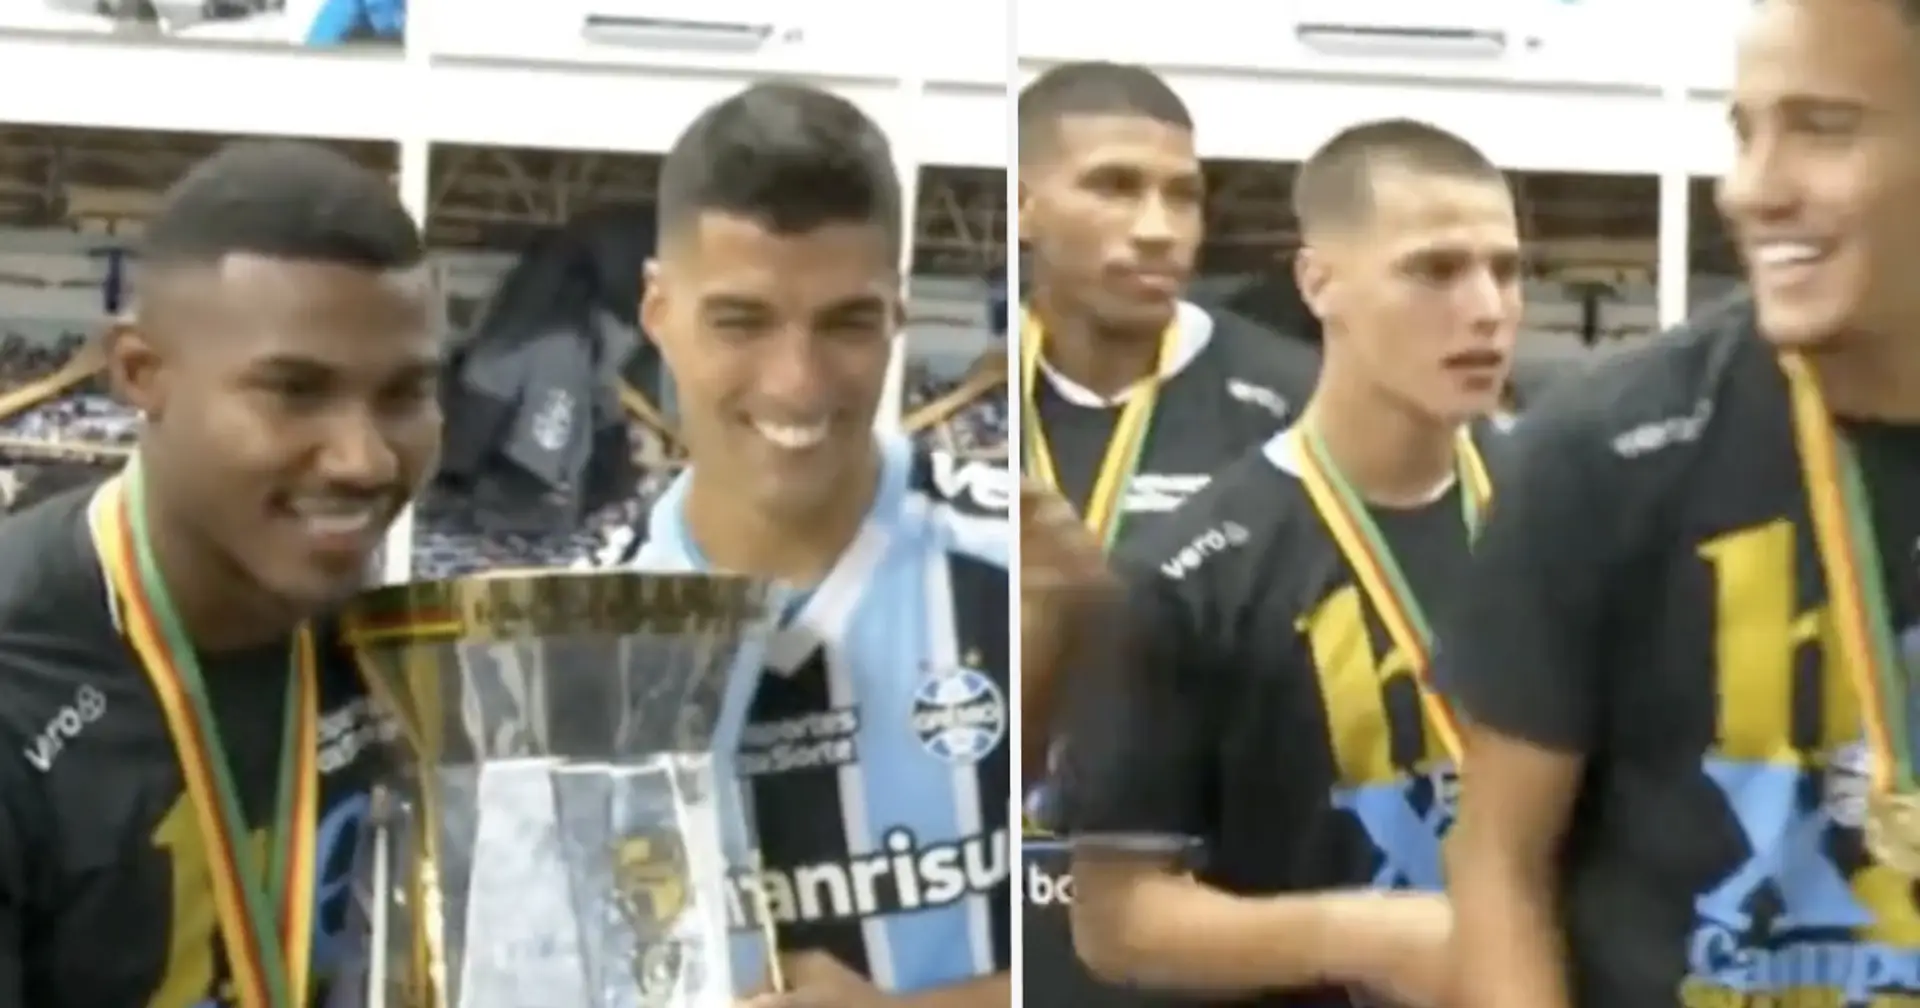 Caught on camera: Luis Suarez wins another trophy with Gremio, teammates queue up to take joint pic 